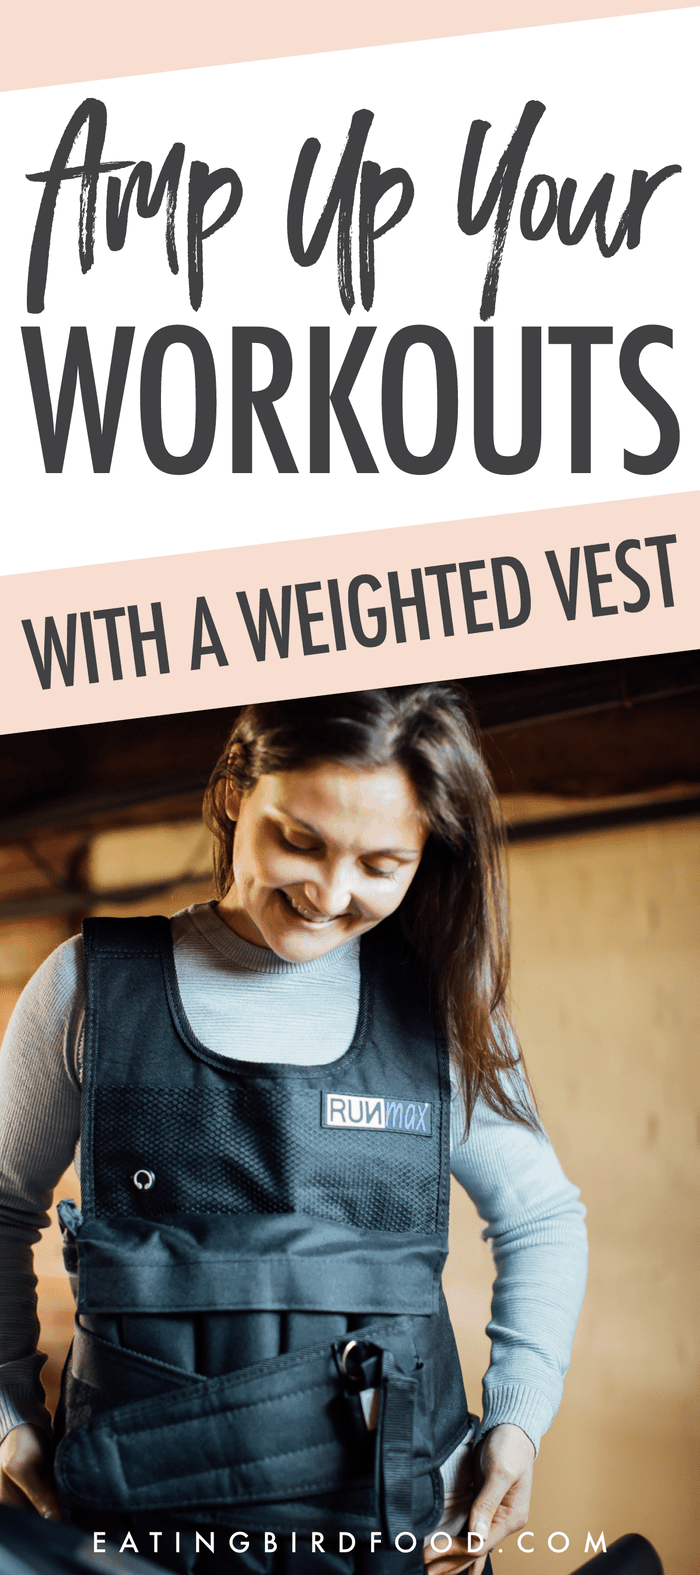 Amp Up Your Workouts With a Weighted Vest